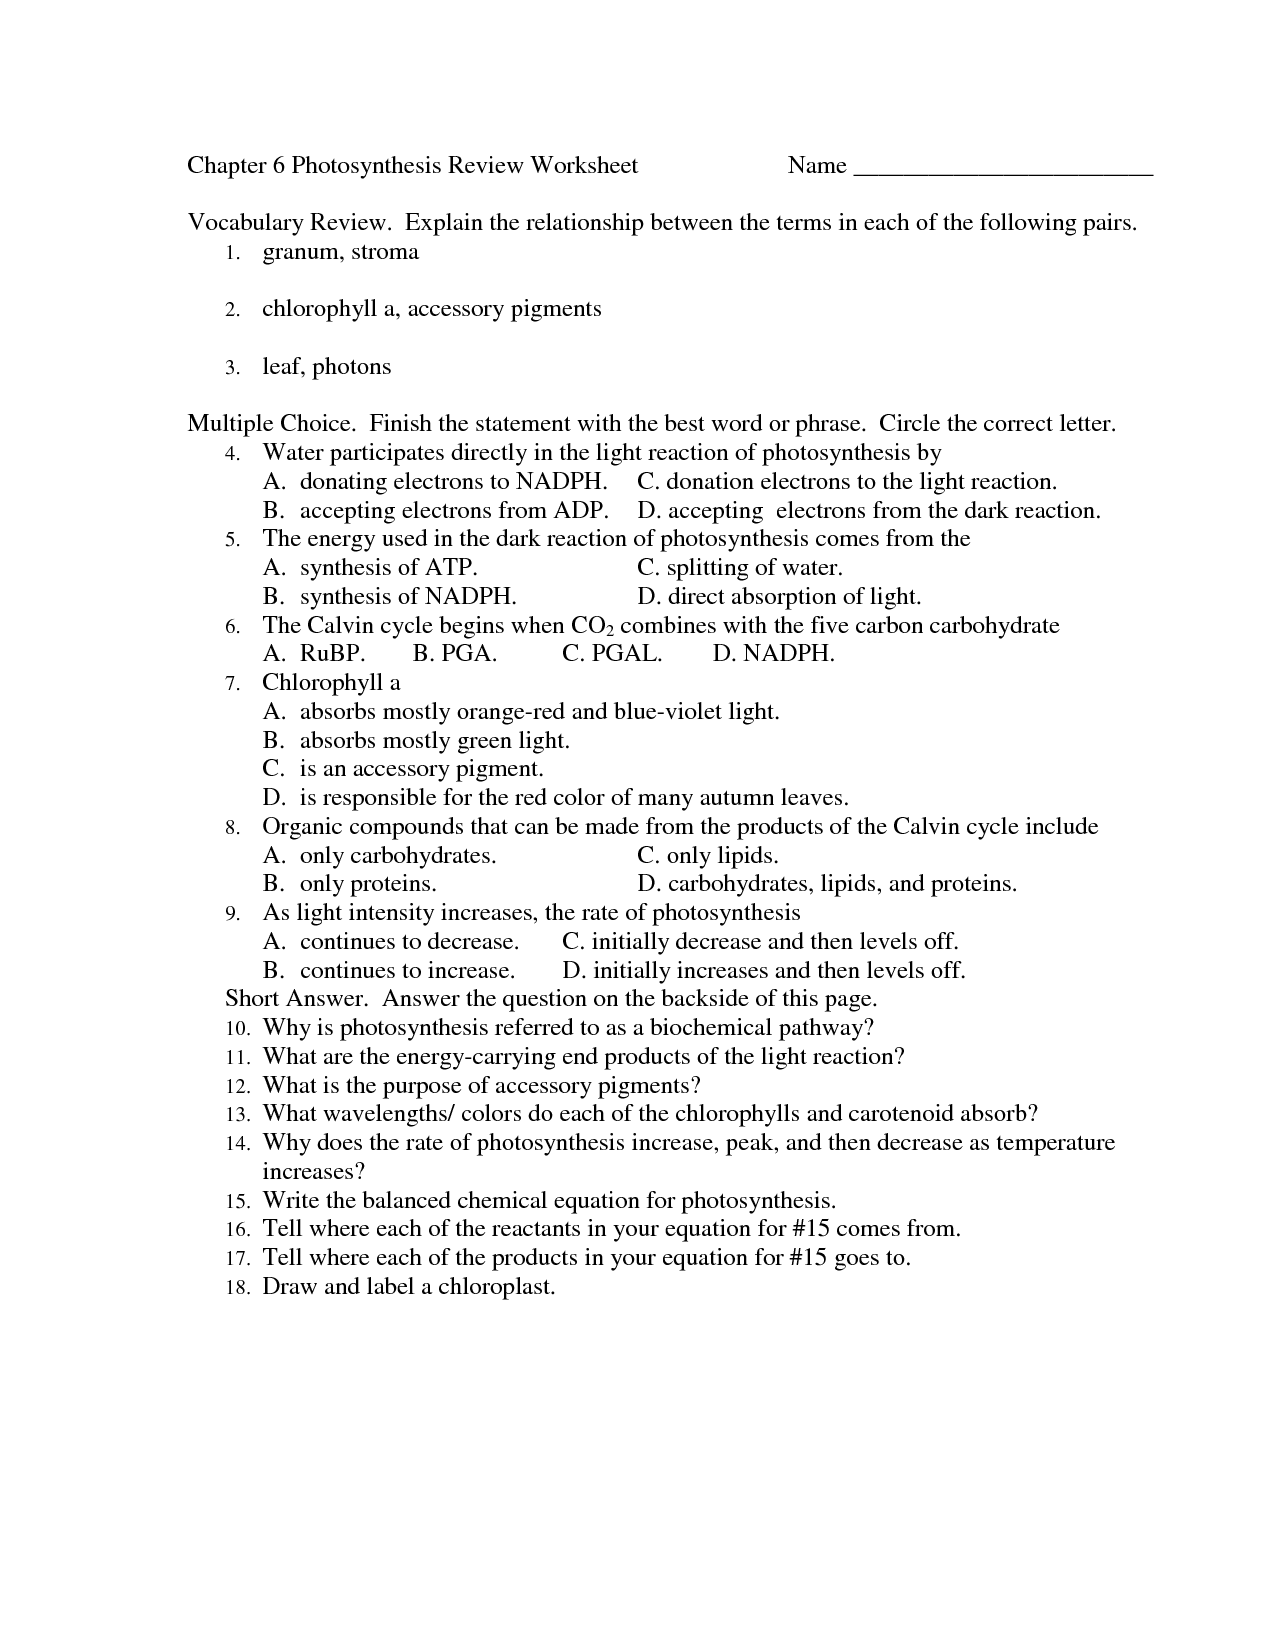 Photosynthesis Review Worksheet Answers